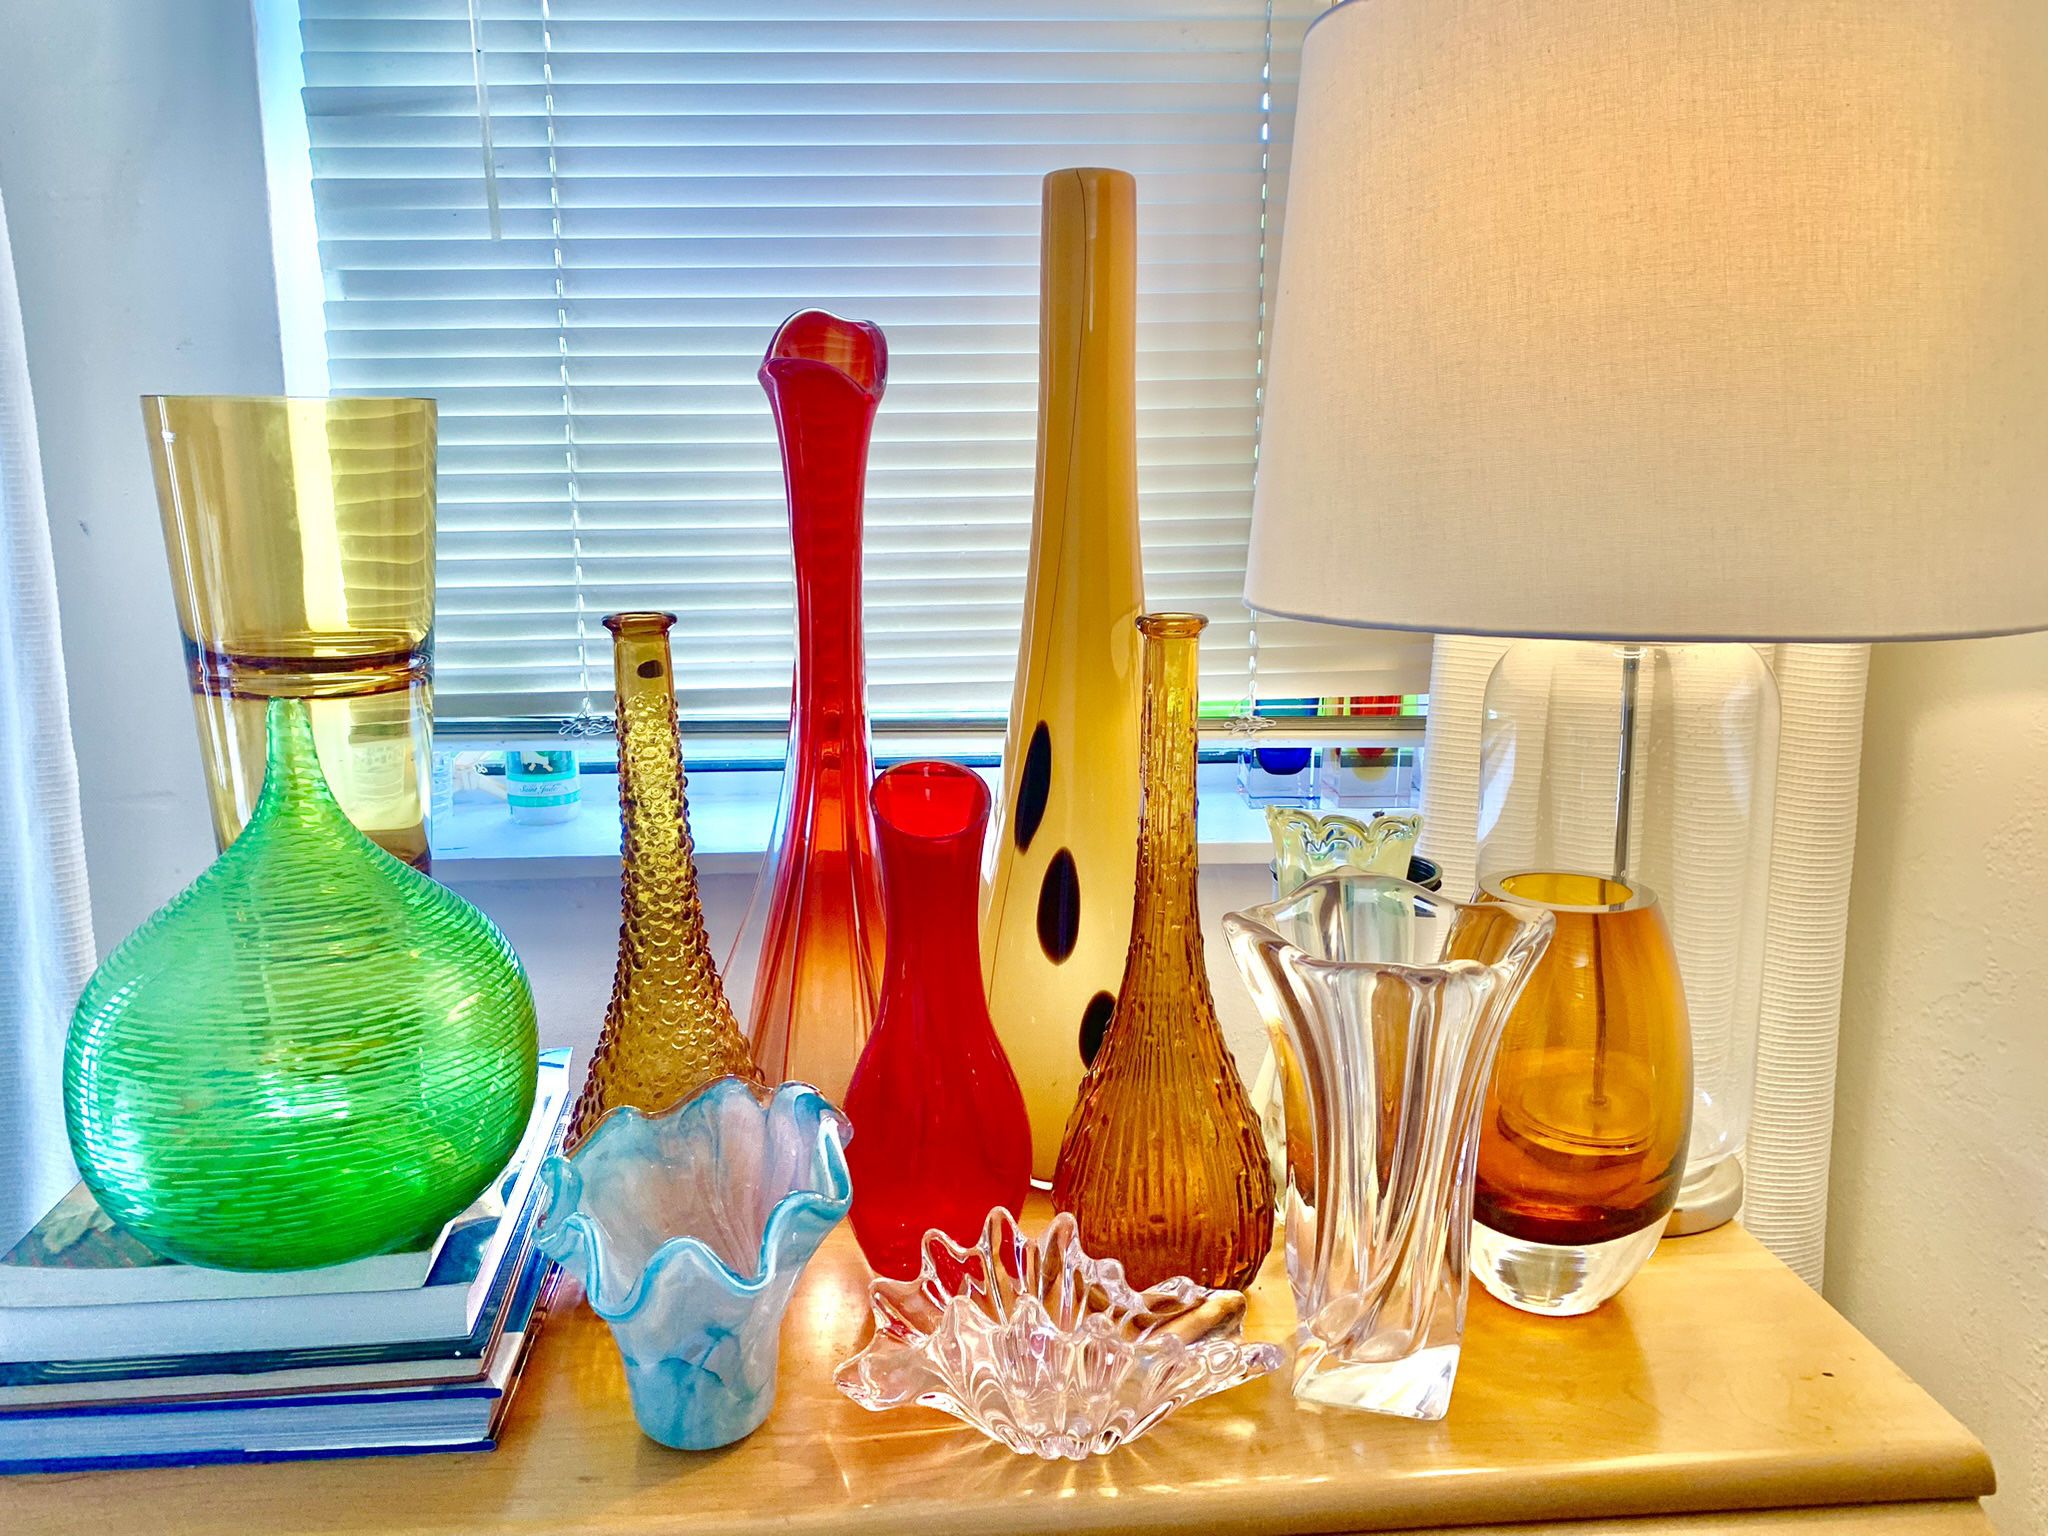 Glass Mid Century Collection ASK FOR PRICES KENDALL AREA